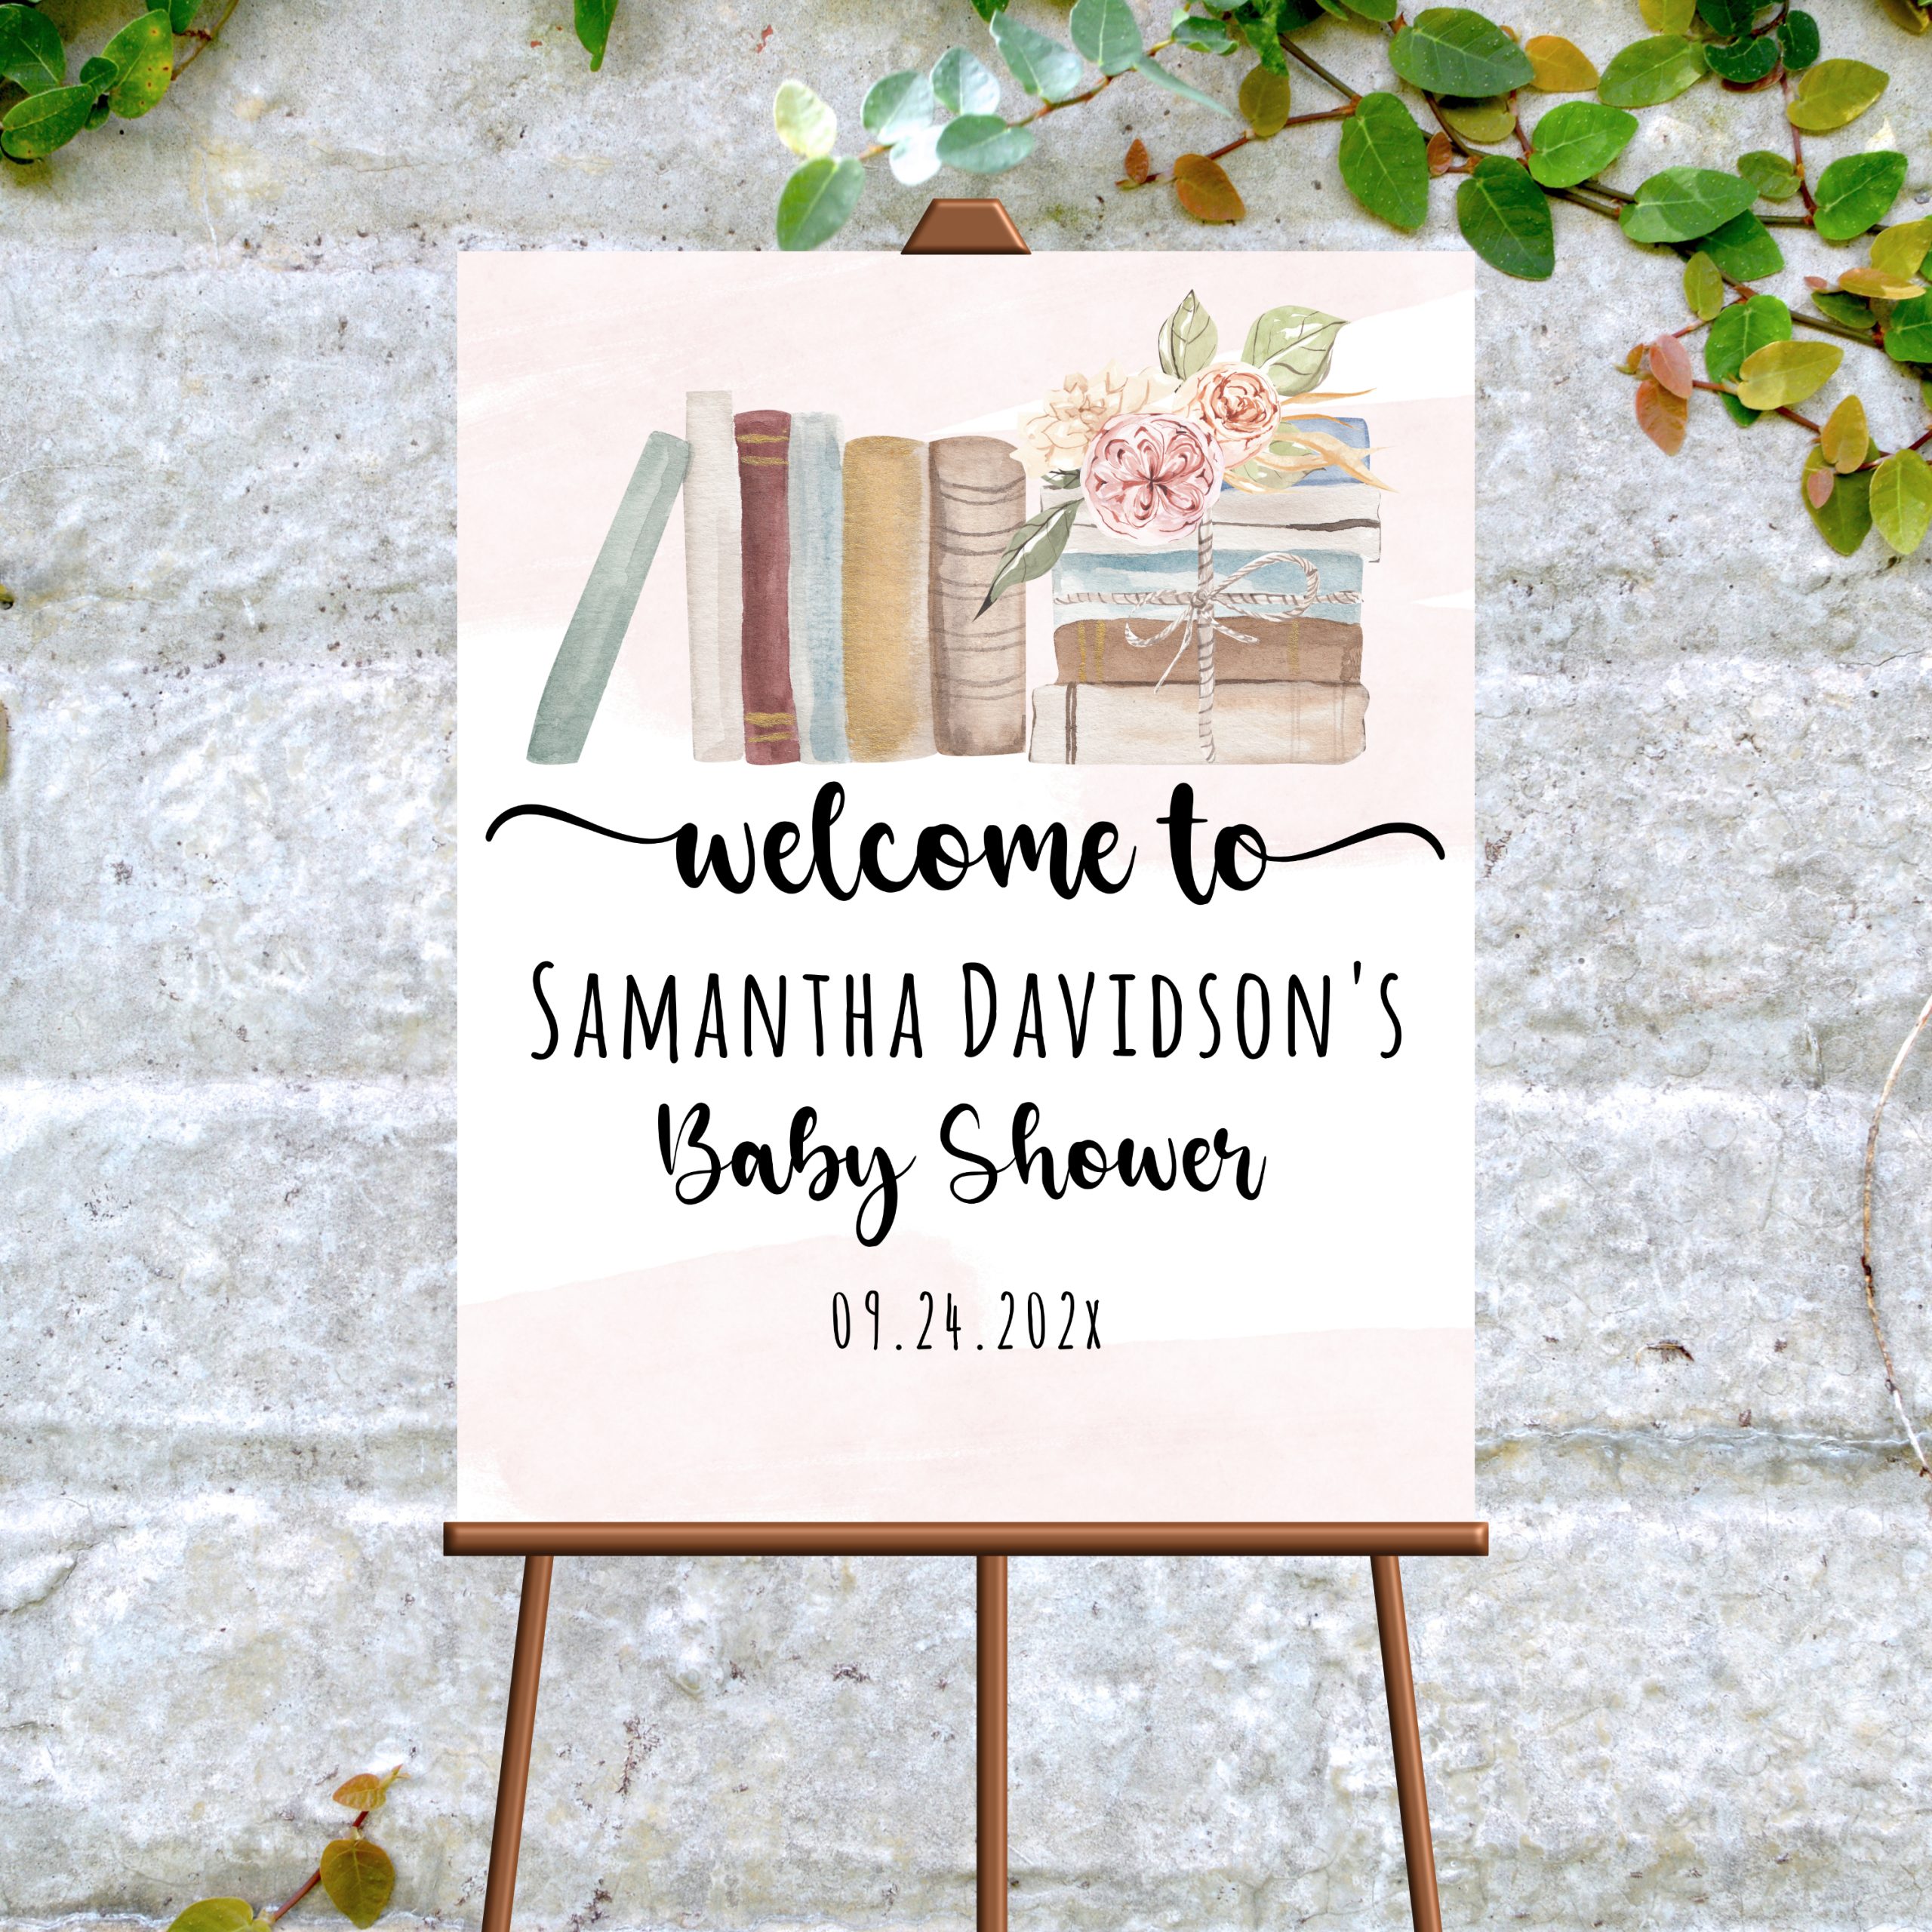 DECOR | SIGNS Editable Storybook Welcome Sign – Pink Storybook Baby Shower Decor – PRINTABLE Corjl Template Book Baby Shower Decor Sign